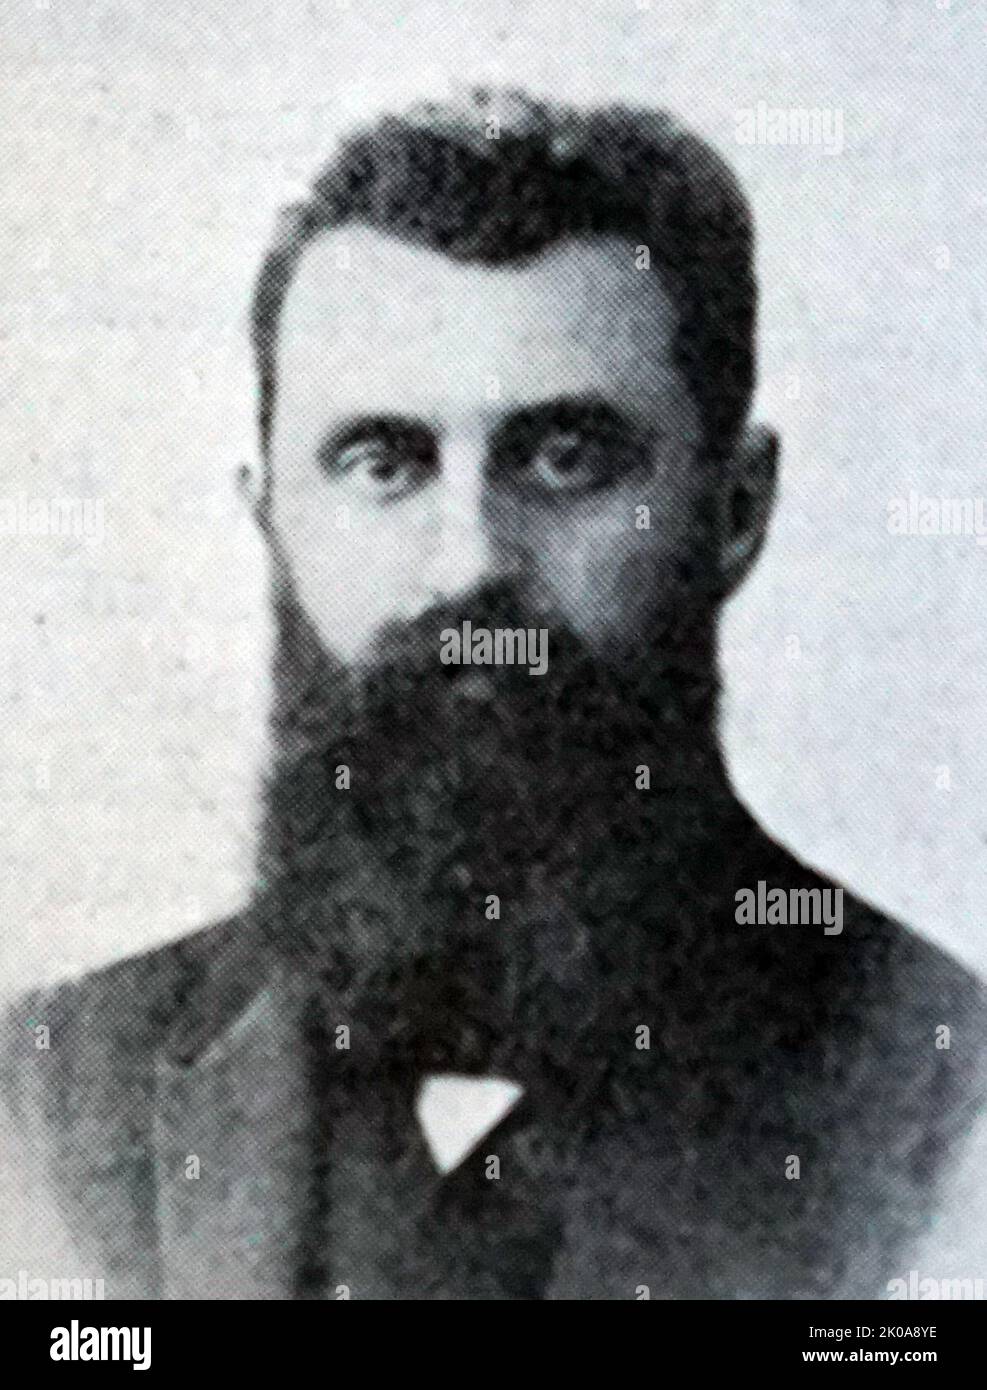 Theodor Herzl (2 May 1860 - 3 July 1904) or Hebrew name given at his brit milah Binyamin Ze'ev, was an Austro-Hungarian Jewish journalist, playwright, political activist, and writer who was the father of modern political Zionism. Herzl formed the Zionist Organization and promoted Jewish immigration to Palestine in an effort to form a Jewish state Stock Photo